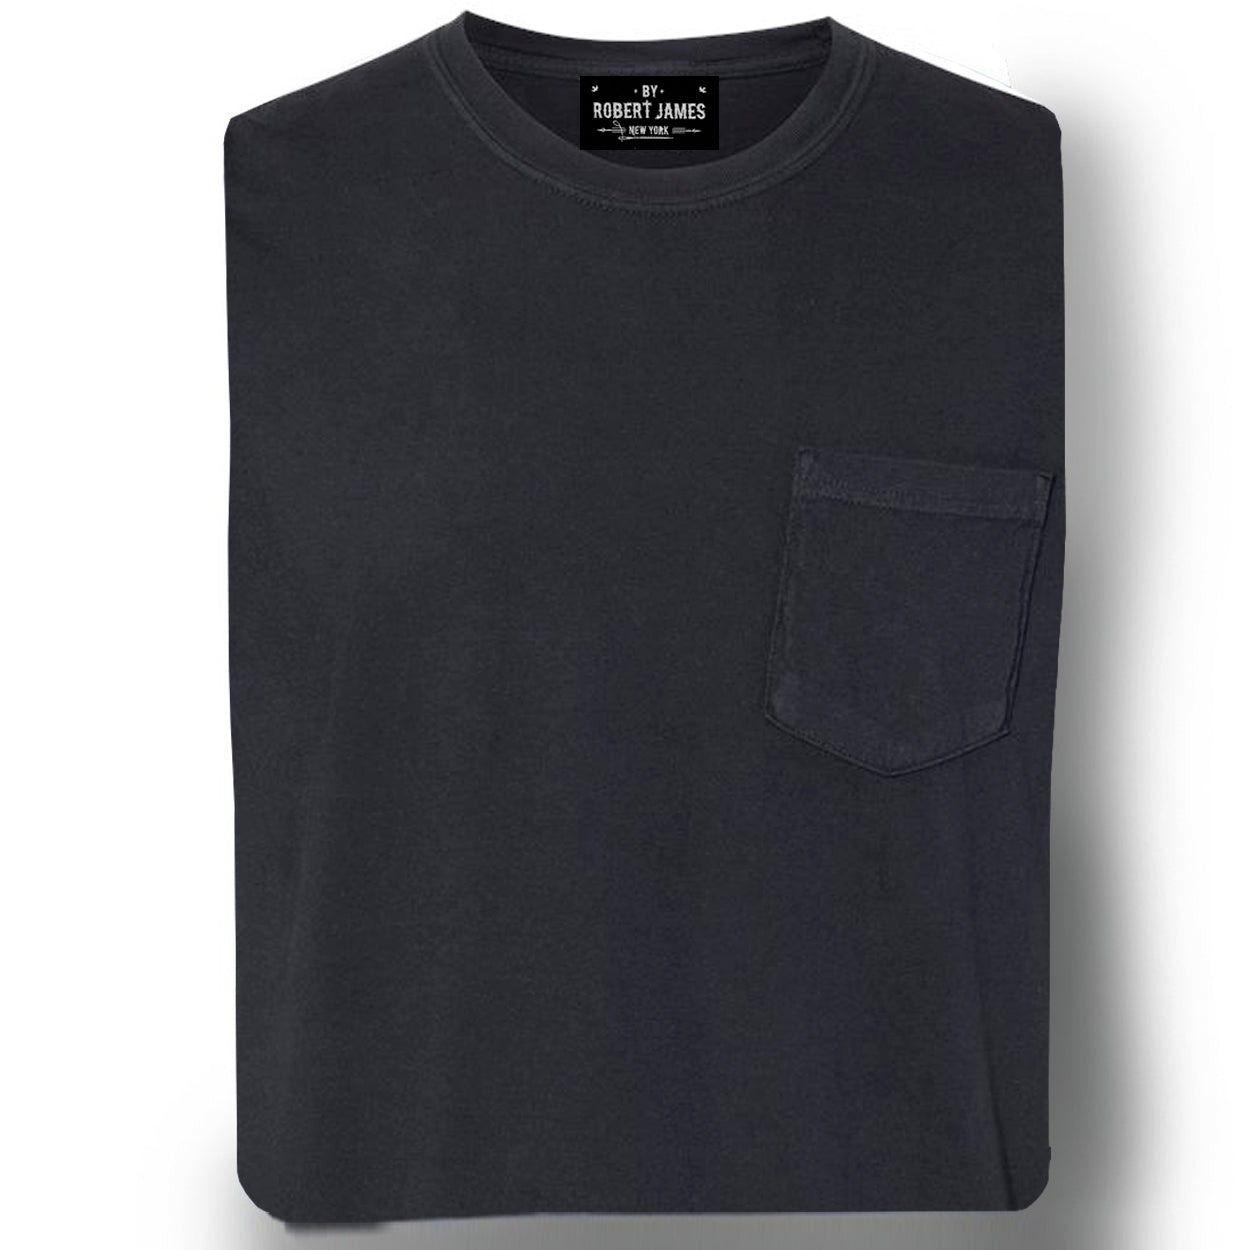 DAGGERS PIGMENT DYED POCKET TEE - WASHED BLACK Men's Knit T-Shirt By Robert James